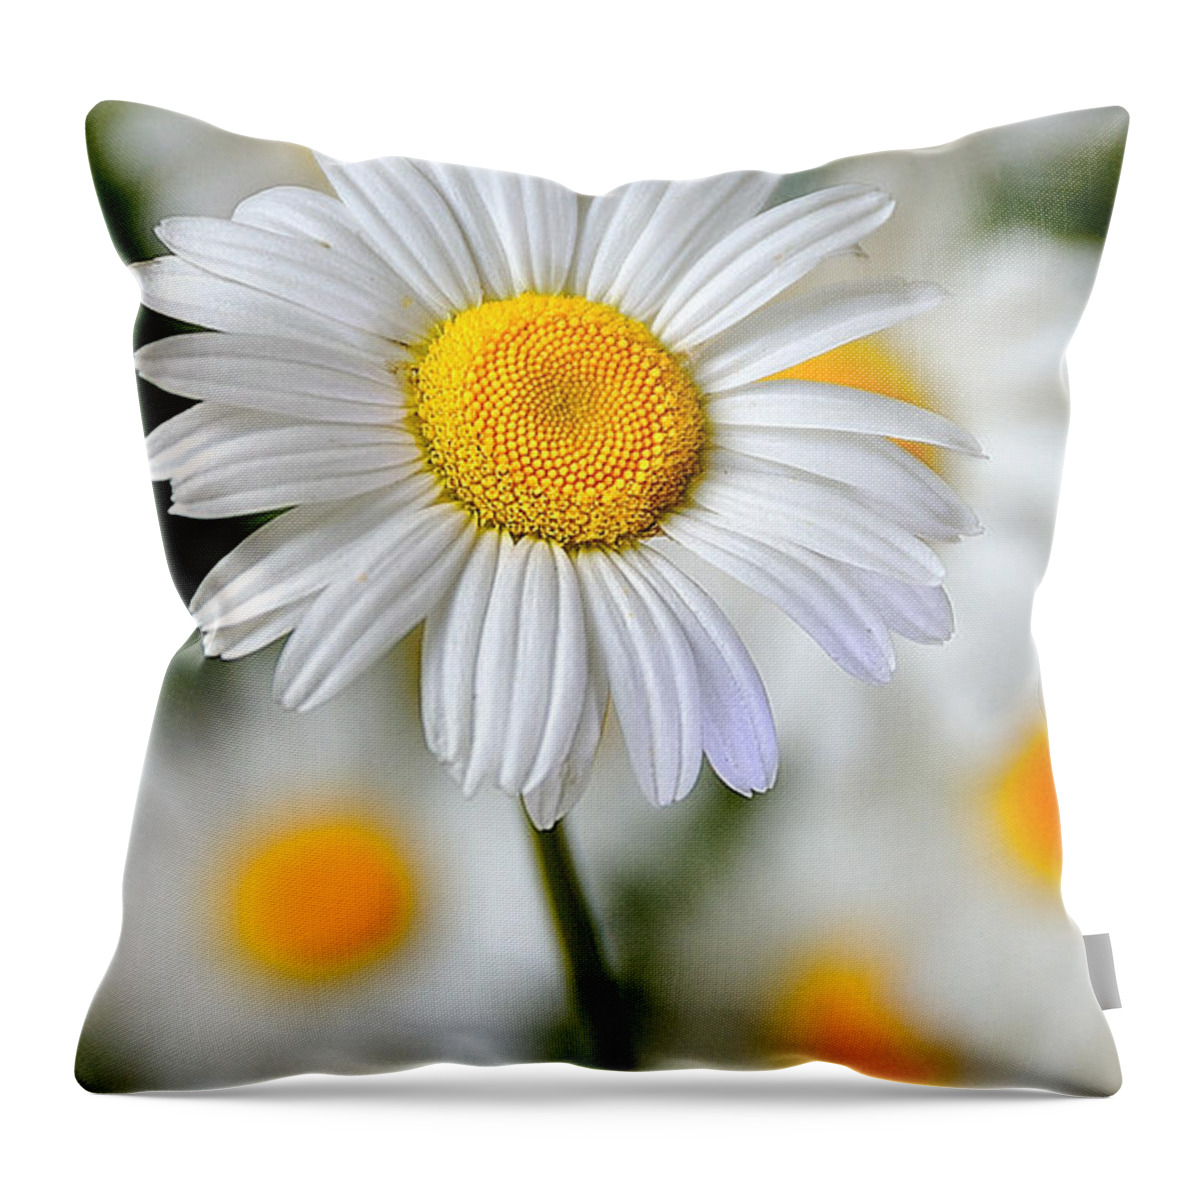 Flower Throw Pillow featuring the photograph Painted Daisies by Mark Fuller